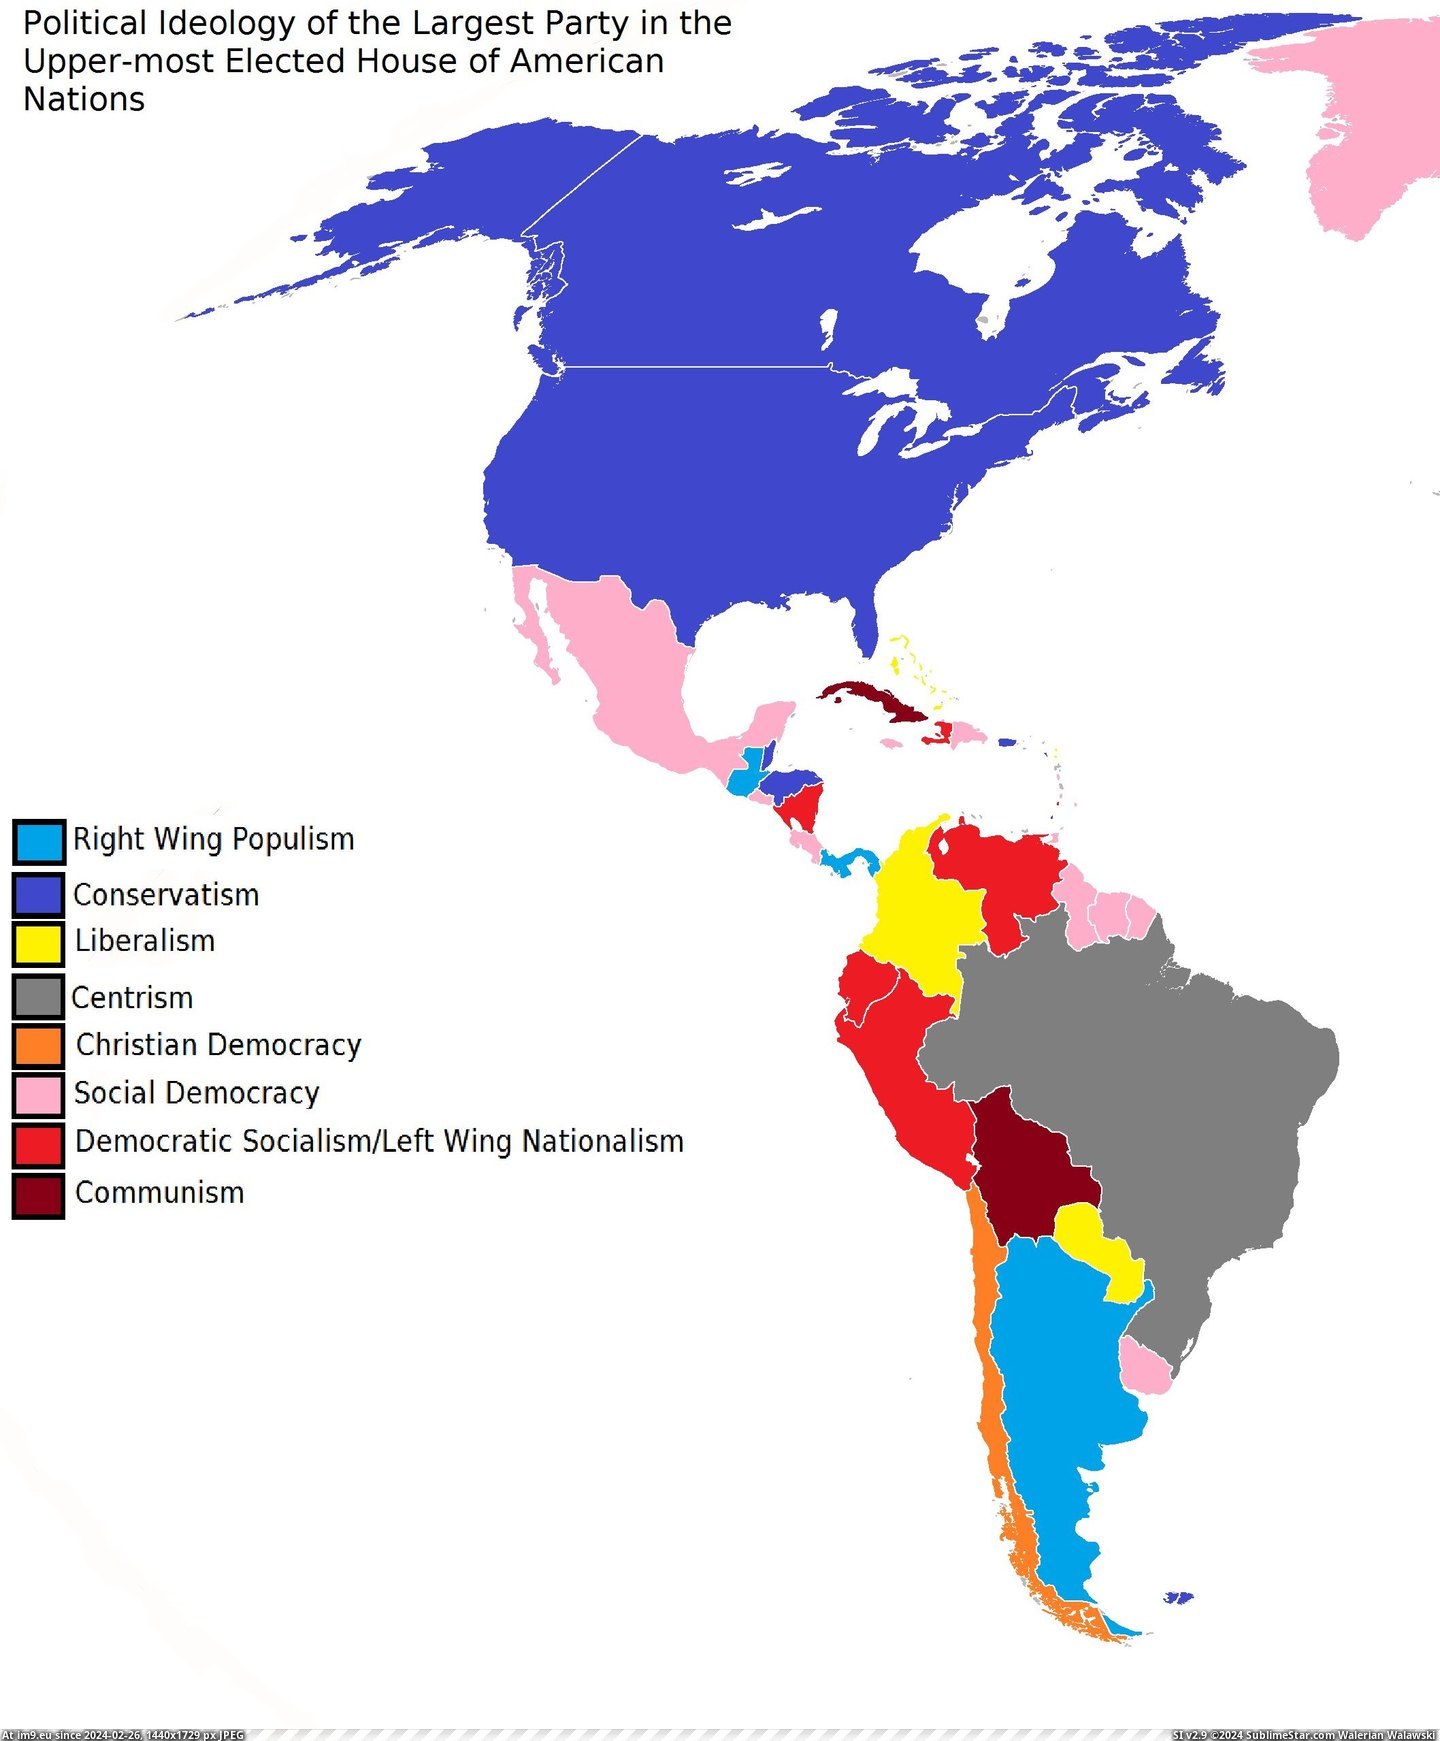 #House #Party #American #Elected #Ideology #Upper #Nations #Political [Mapporn]  Political Ideology of the Largst Party in the Upper-most Elected House of American Nations [2116x2552] Pic. (Изображение из альбом My r/MAPS favs))